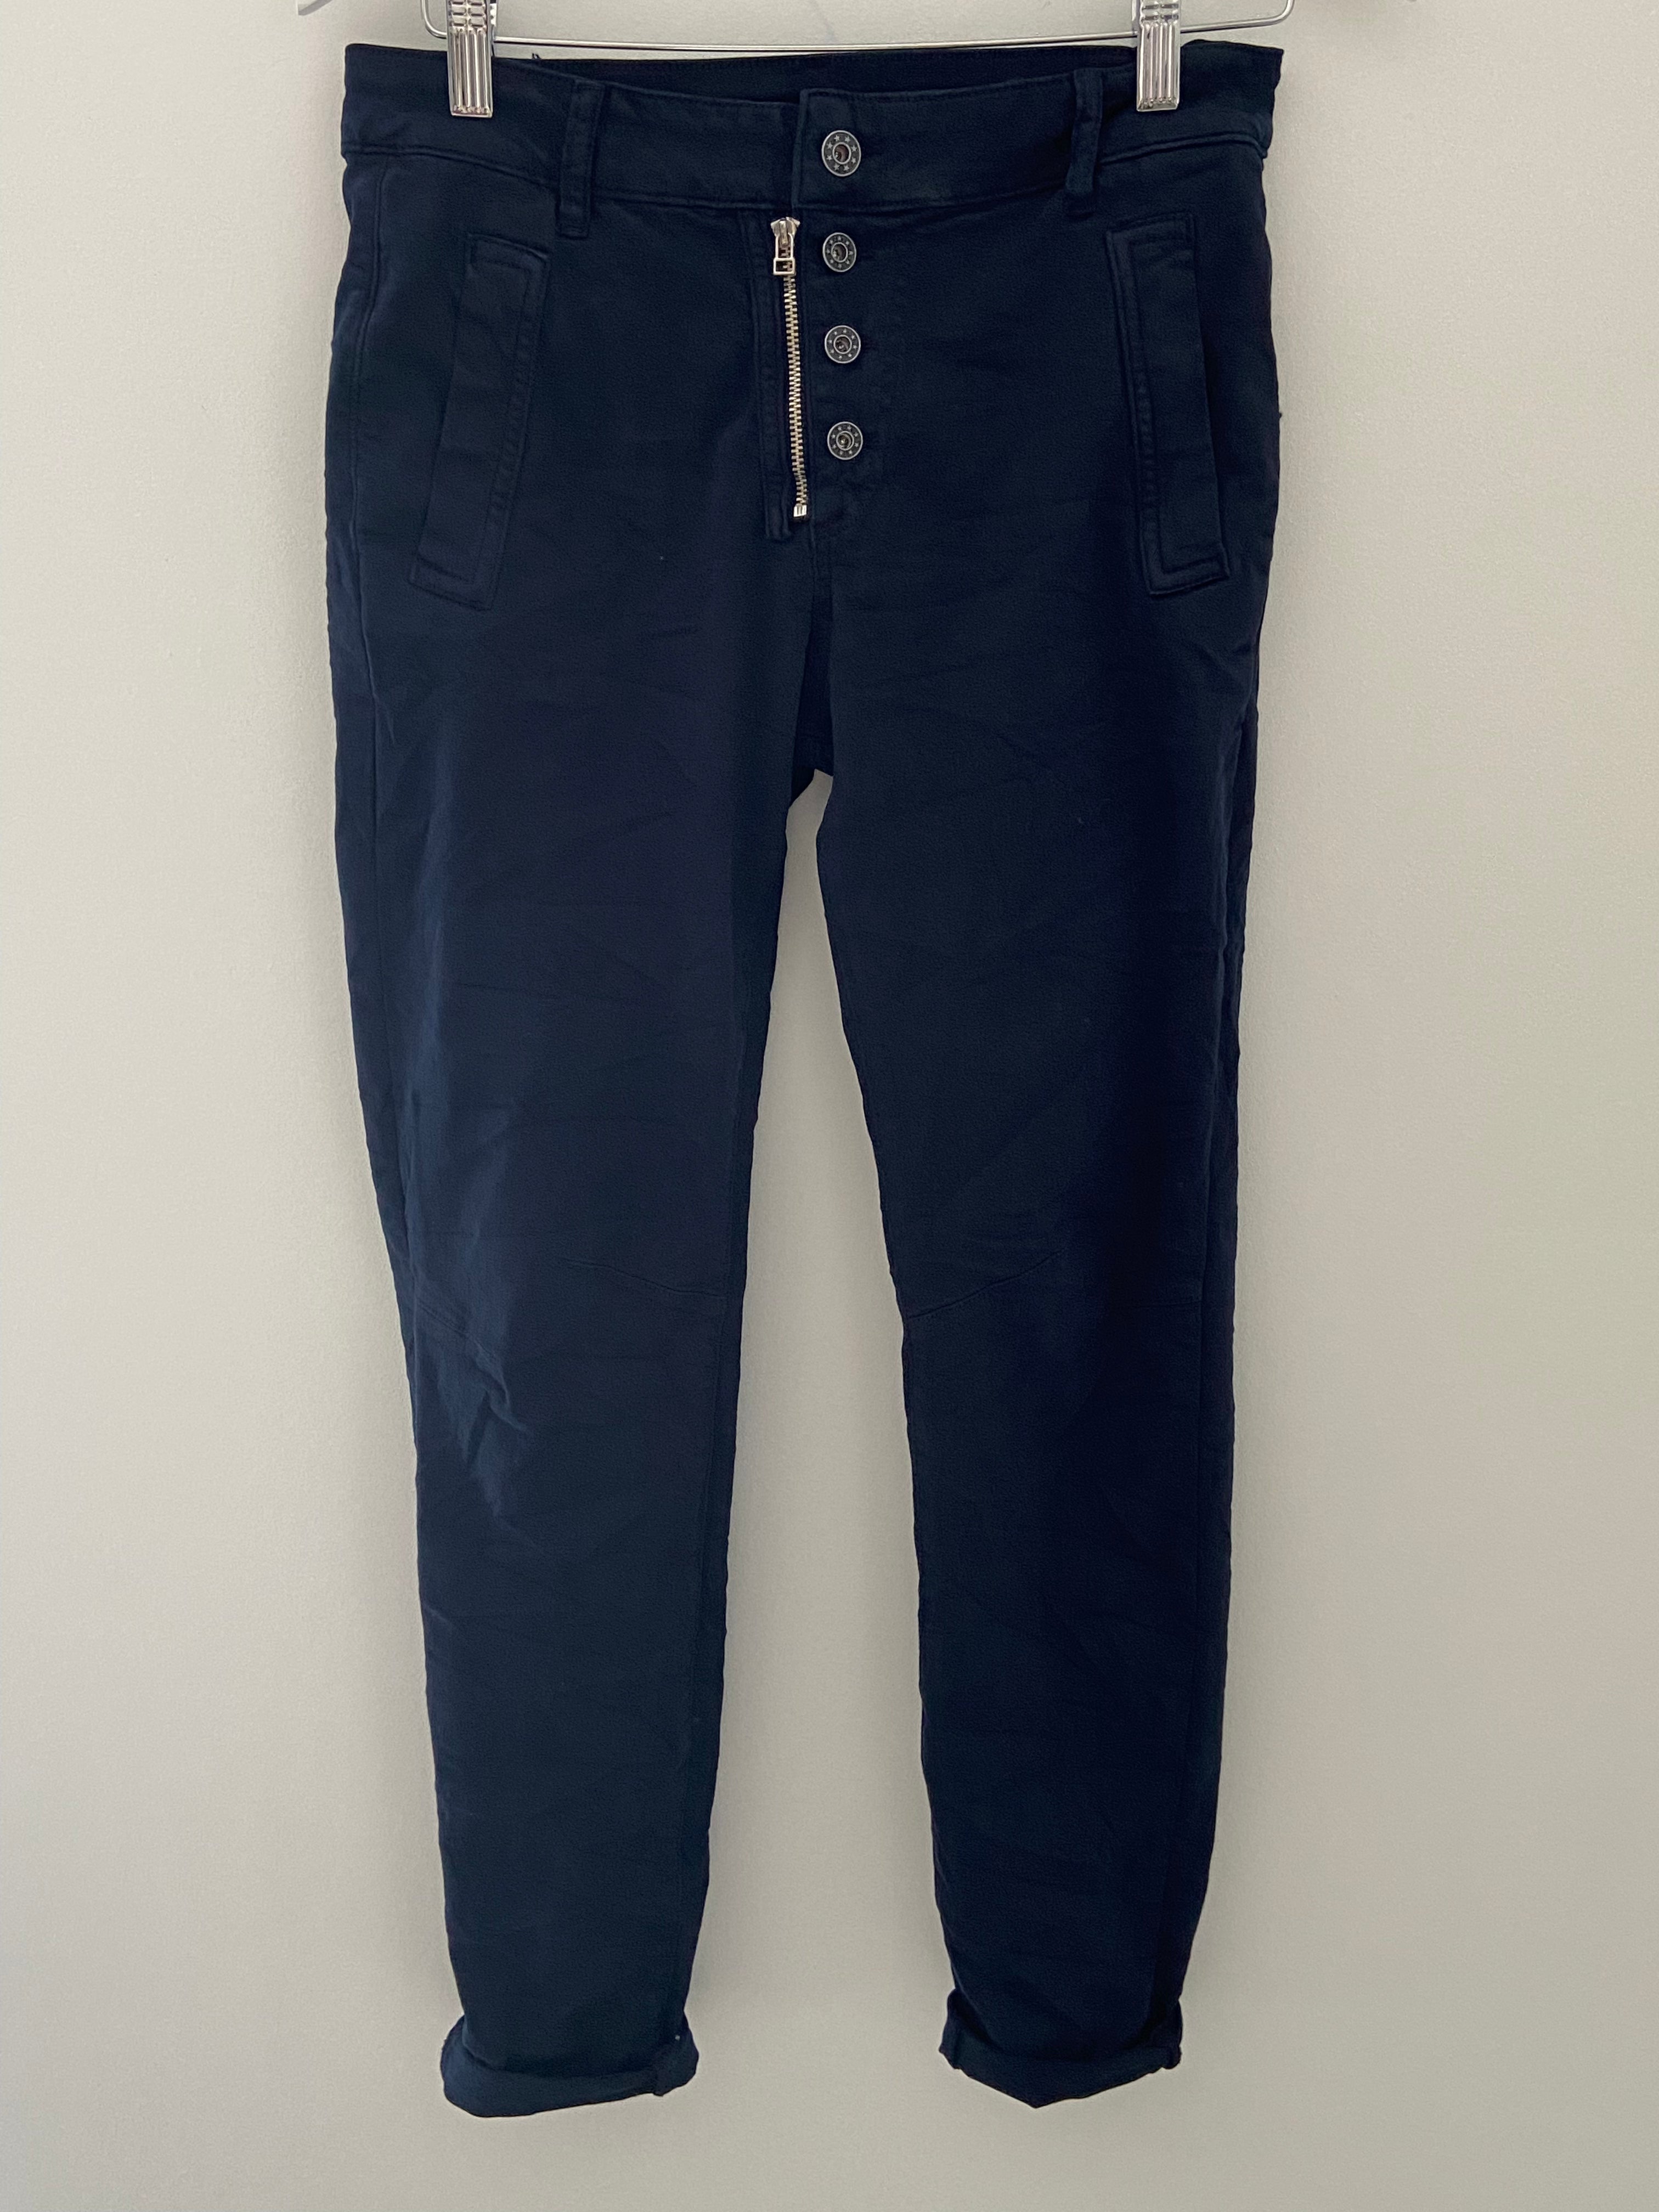 Button & Zip Fly Stretch Jeans in Ink